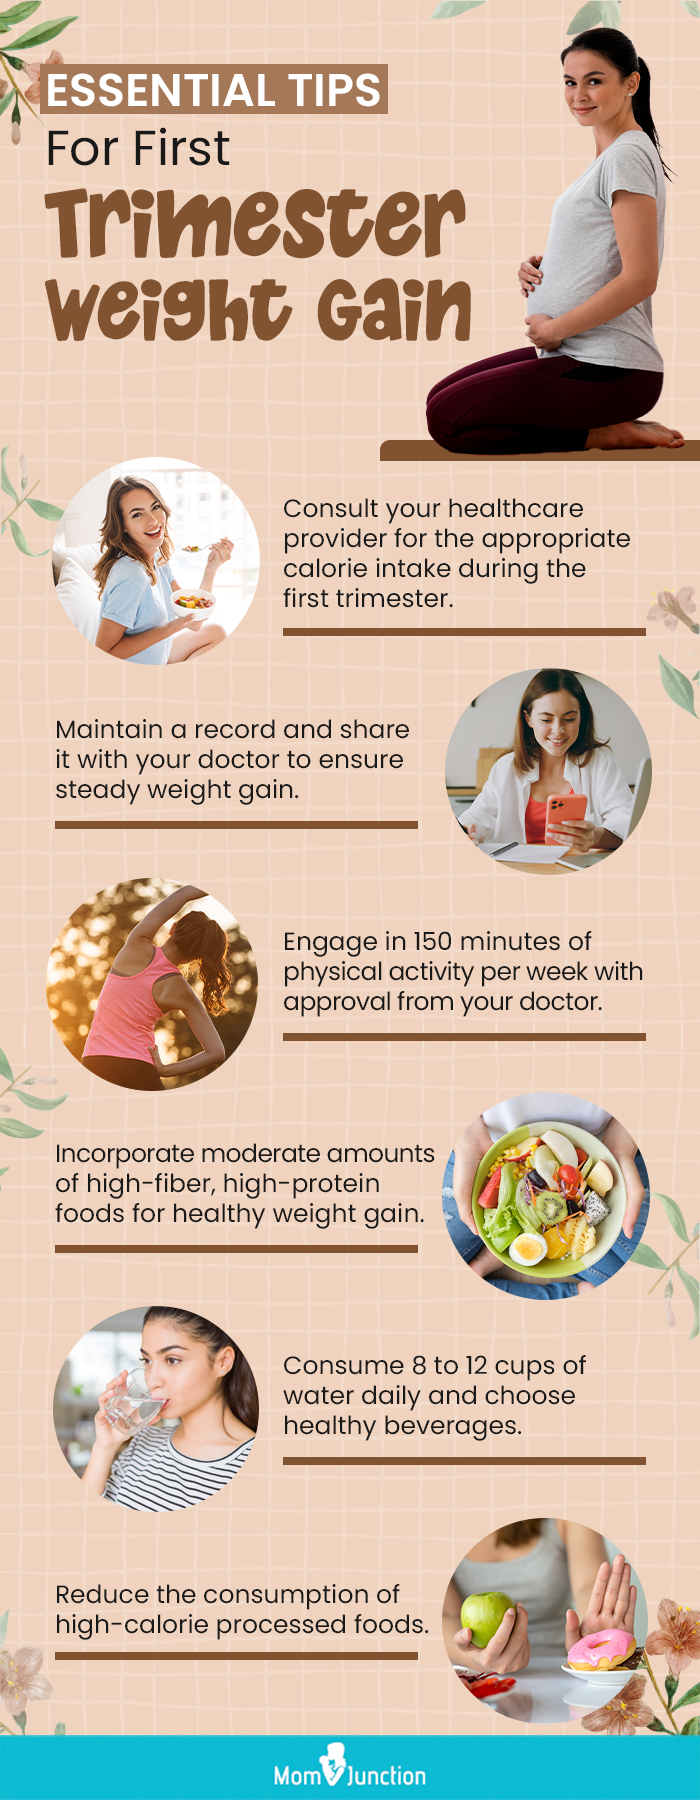 essential tips for first trimester weight gain (infographic)